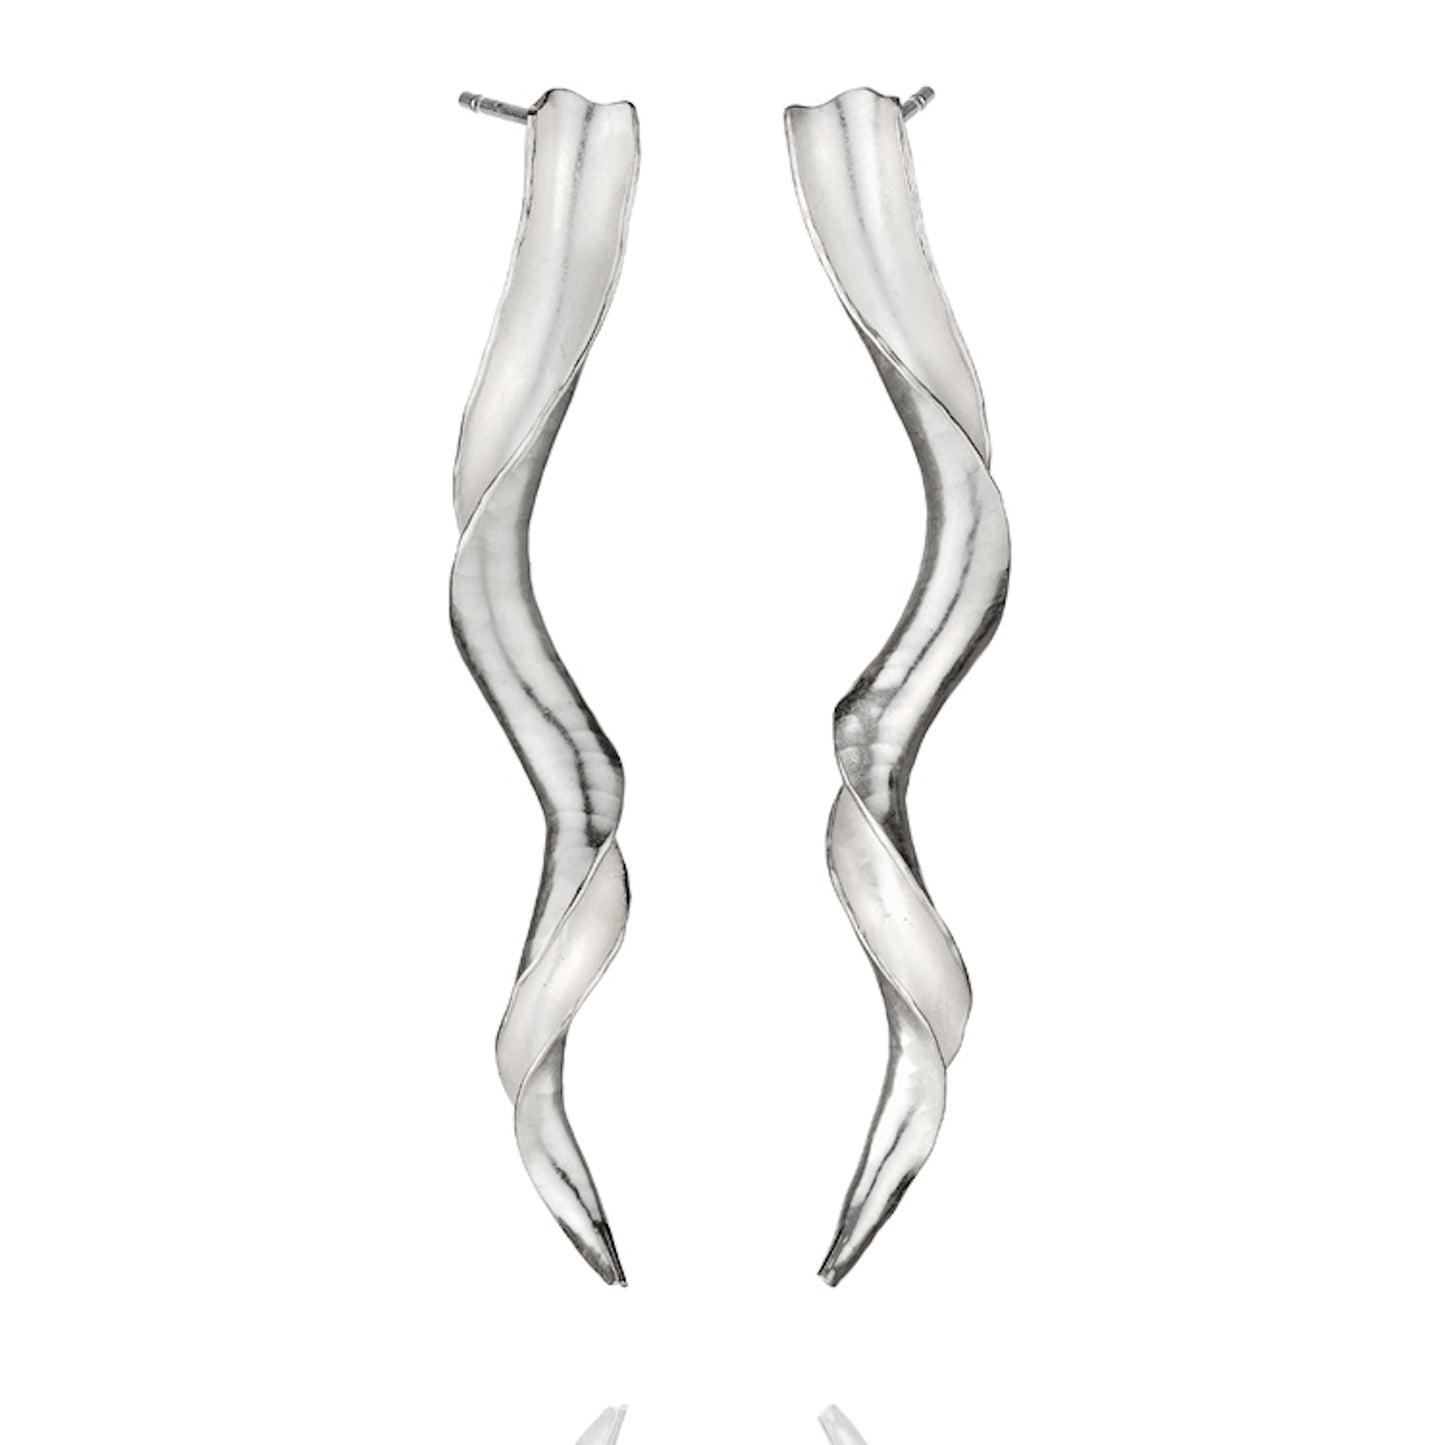 A pair of mirror image silver spiral stud earrings, each in the form of a tapered spiralling tube with one side open to show the inner surface. They have a satin matte finish and hammered texture.